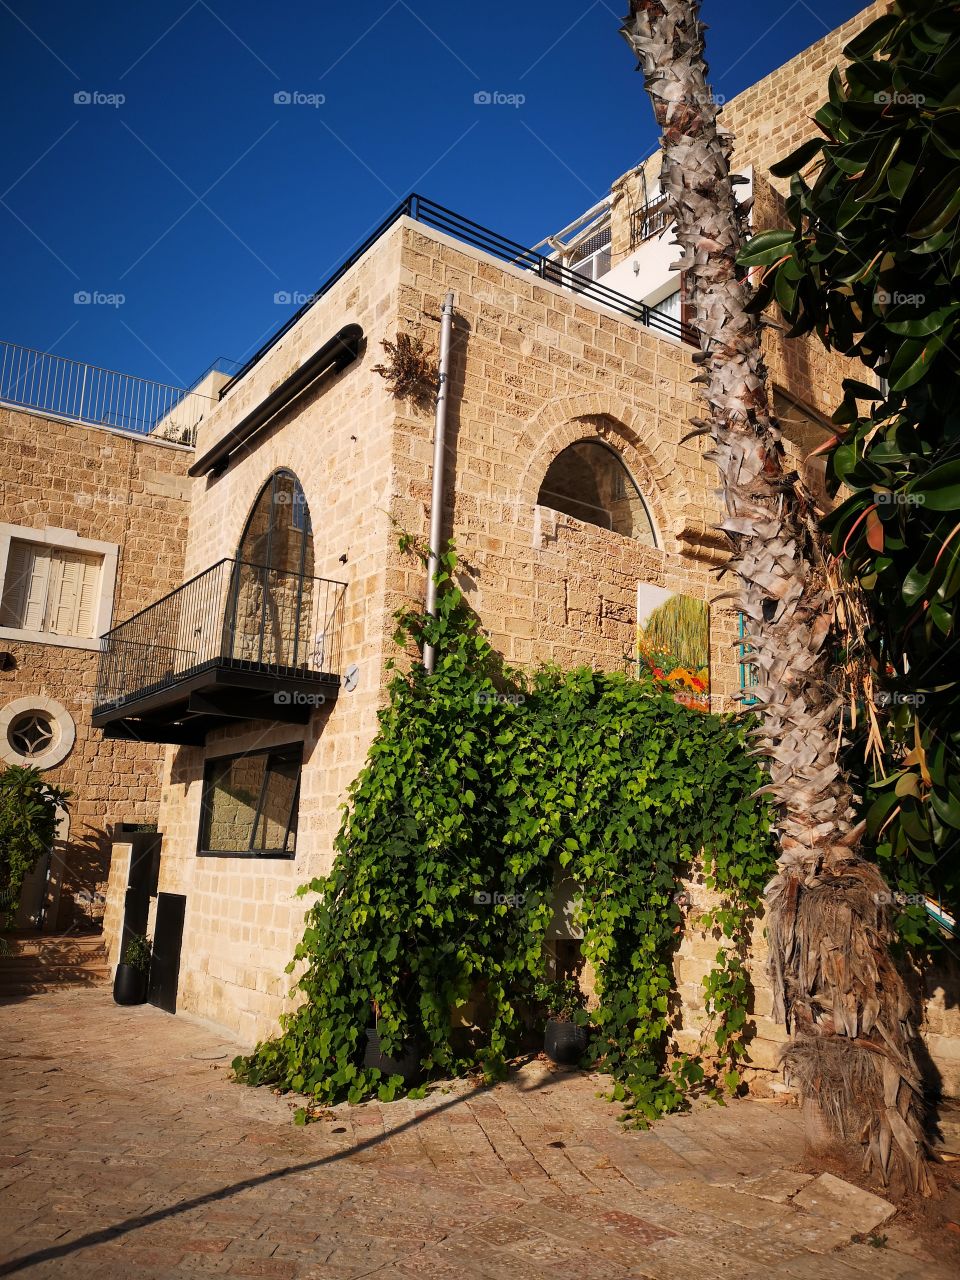 Alleys of old Jaffa day and evening